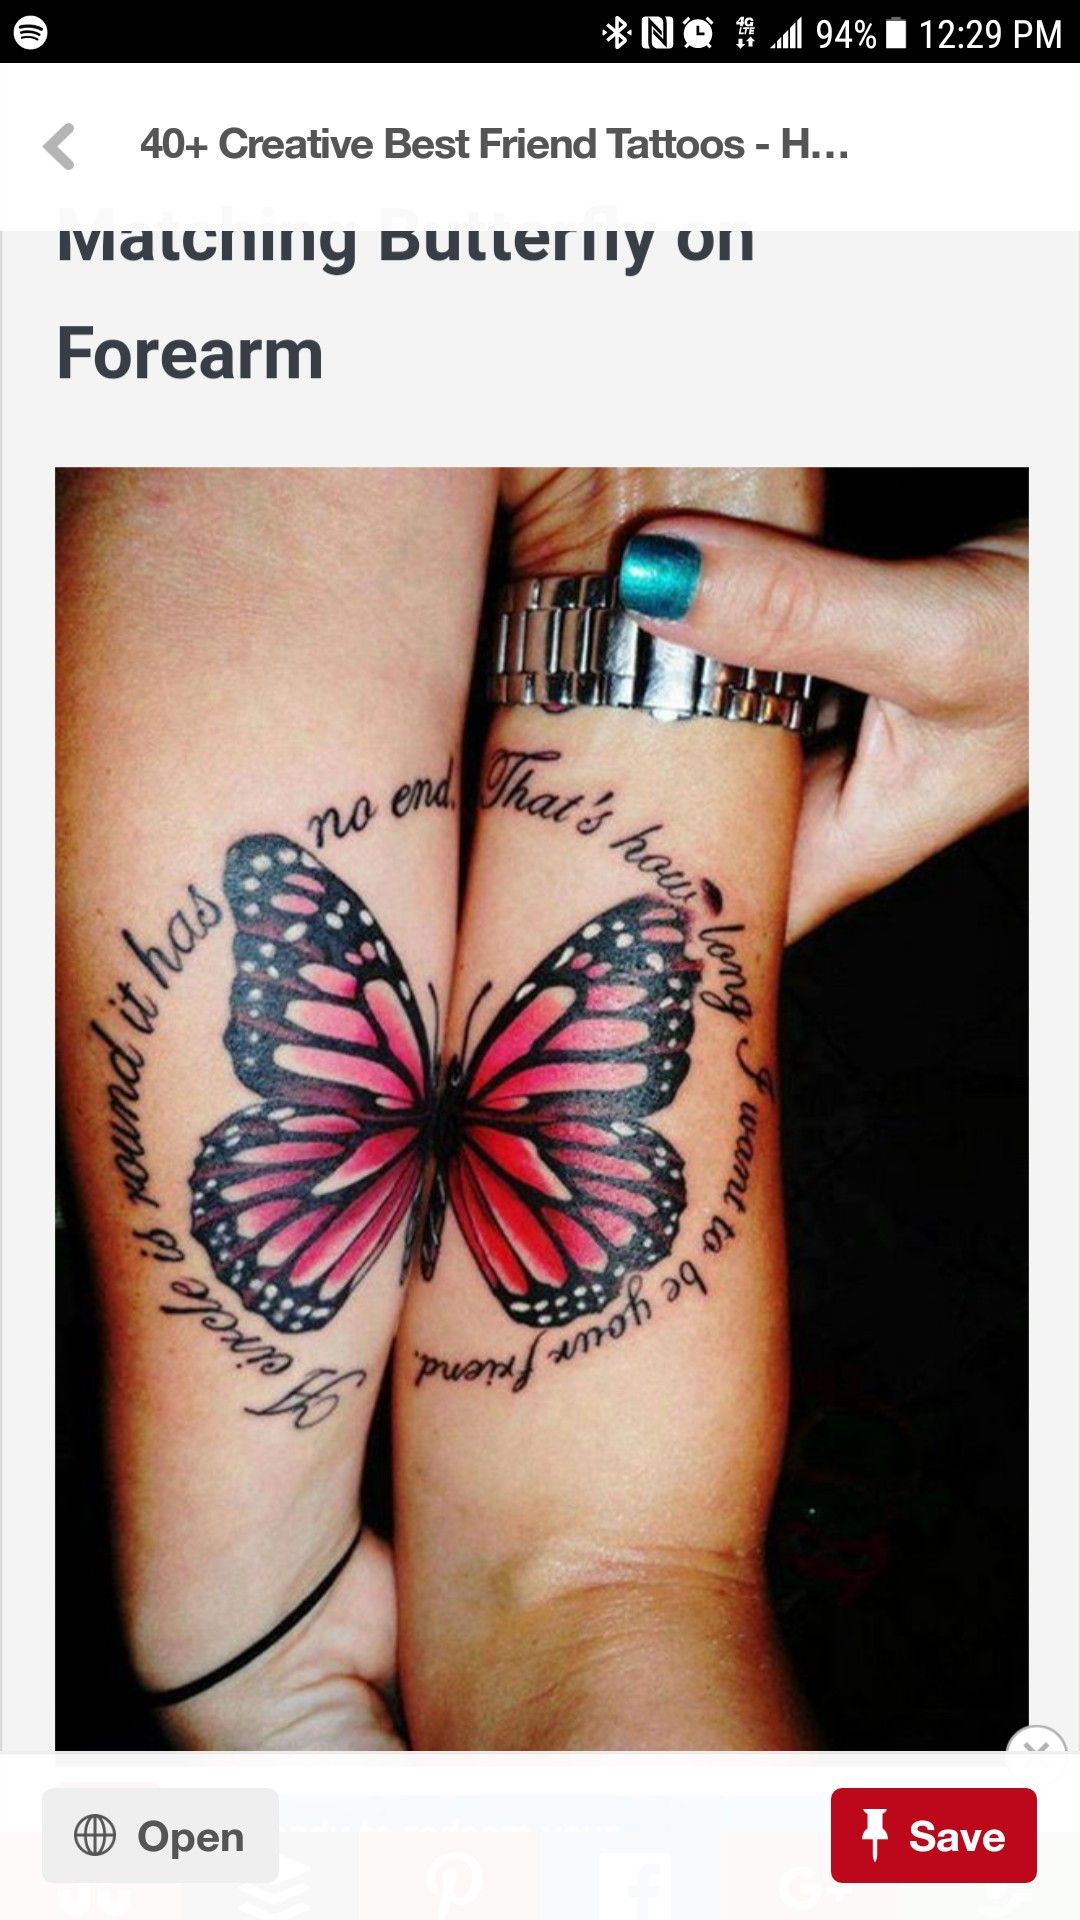 Pin Julie On This That Tattoos For Daughters Friendship throughout proportions 1080 X 1920